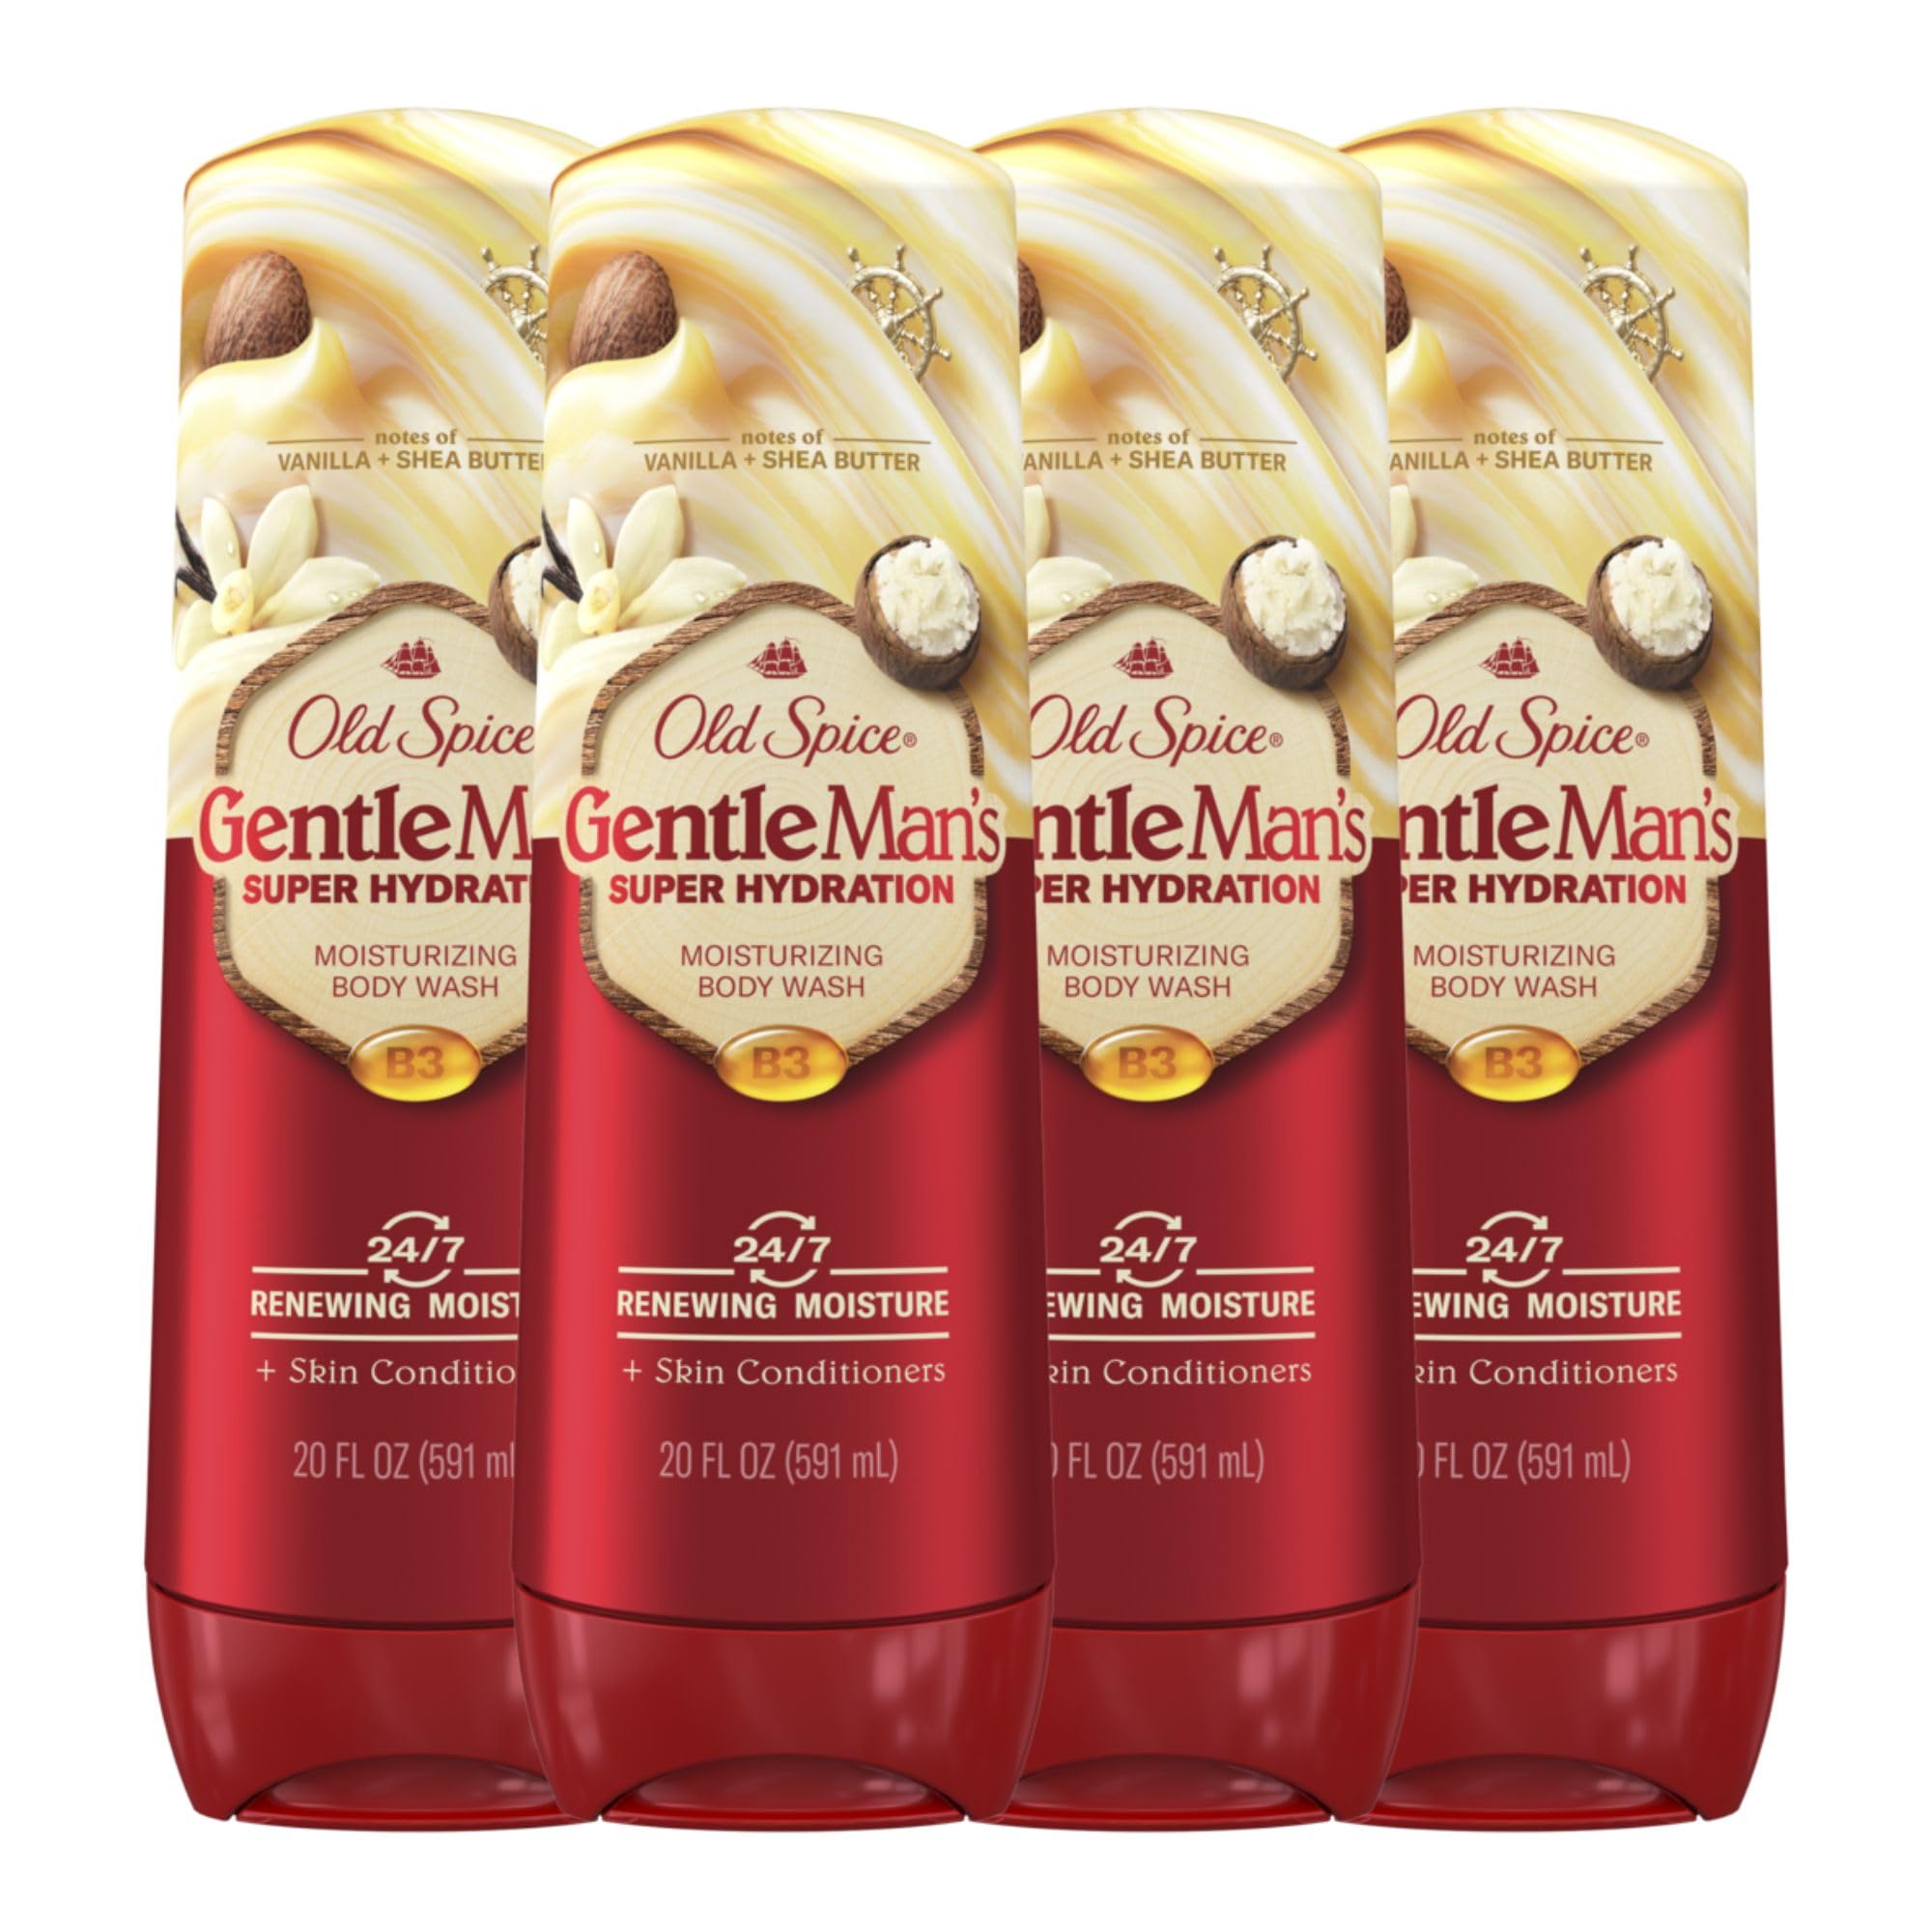 Old Spice Super Hydration Body Wash GentleMan’s Blend Vanilla + Shae for Deep Cleaning and 24/7 Renewing Moisture, 20 oz (Pack of 4)